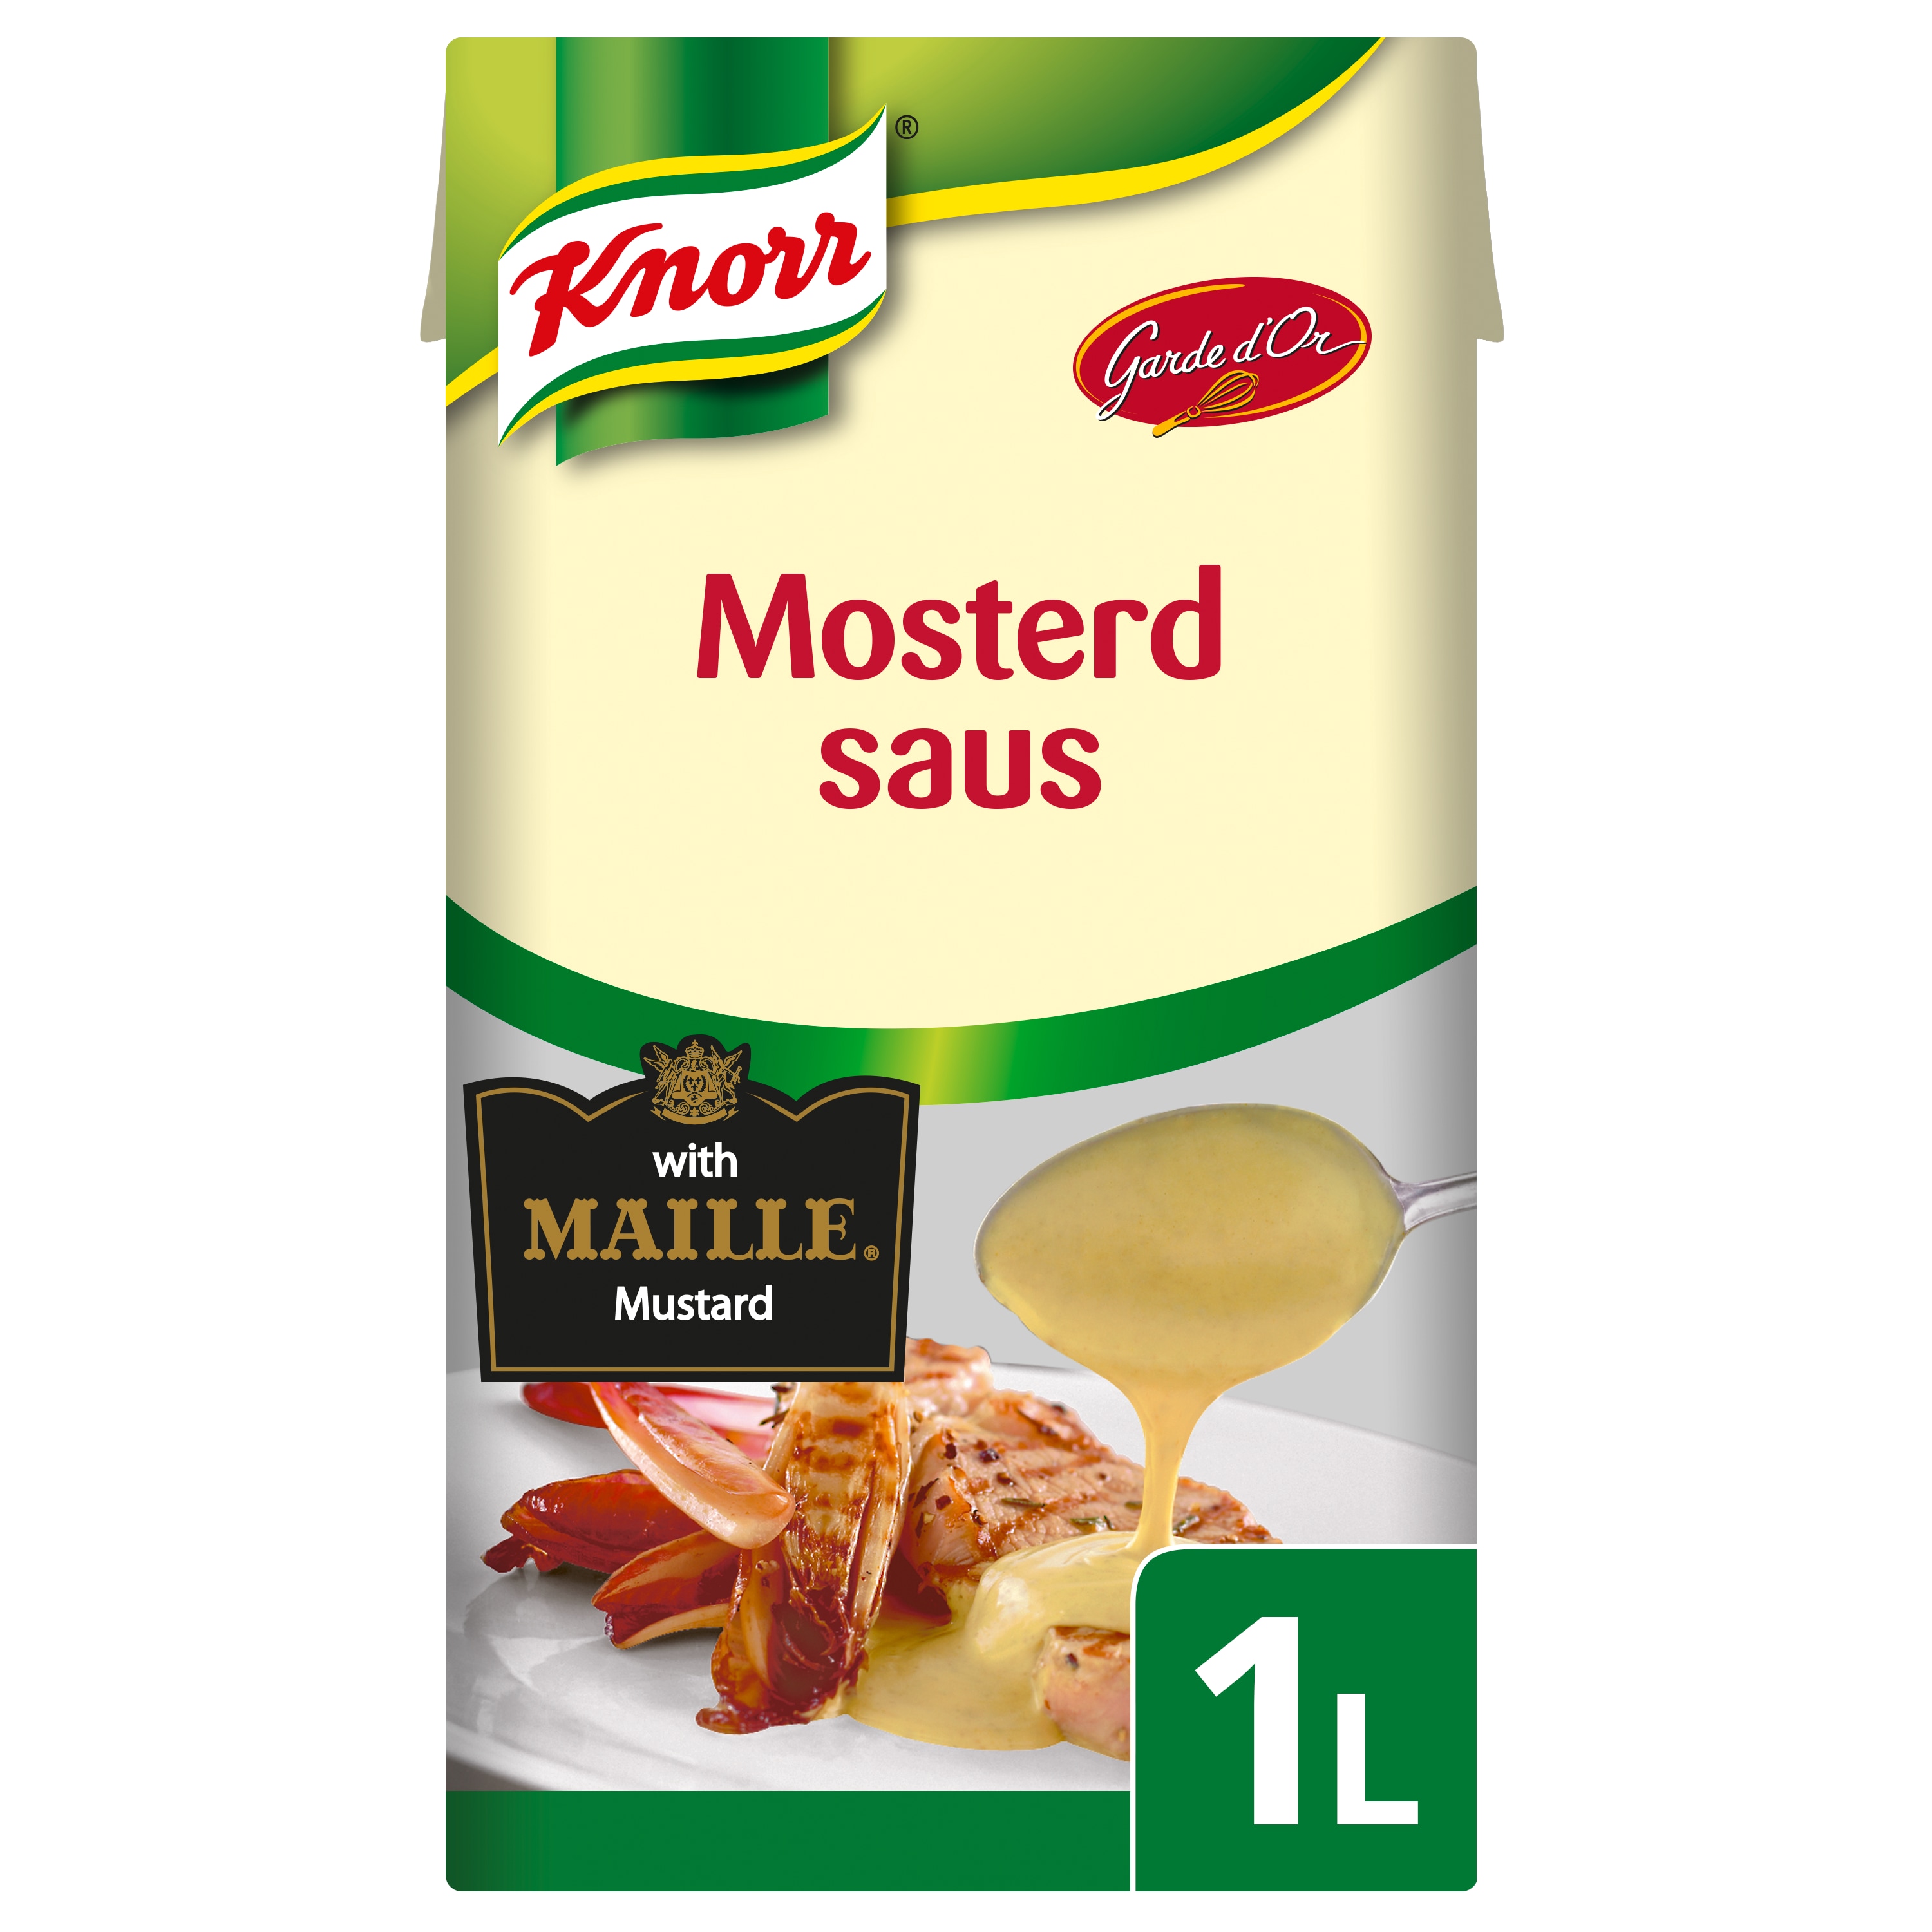 Knorr Garde d'Or Mosterd Saus 1L - 